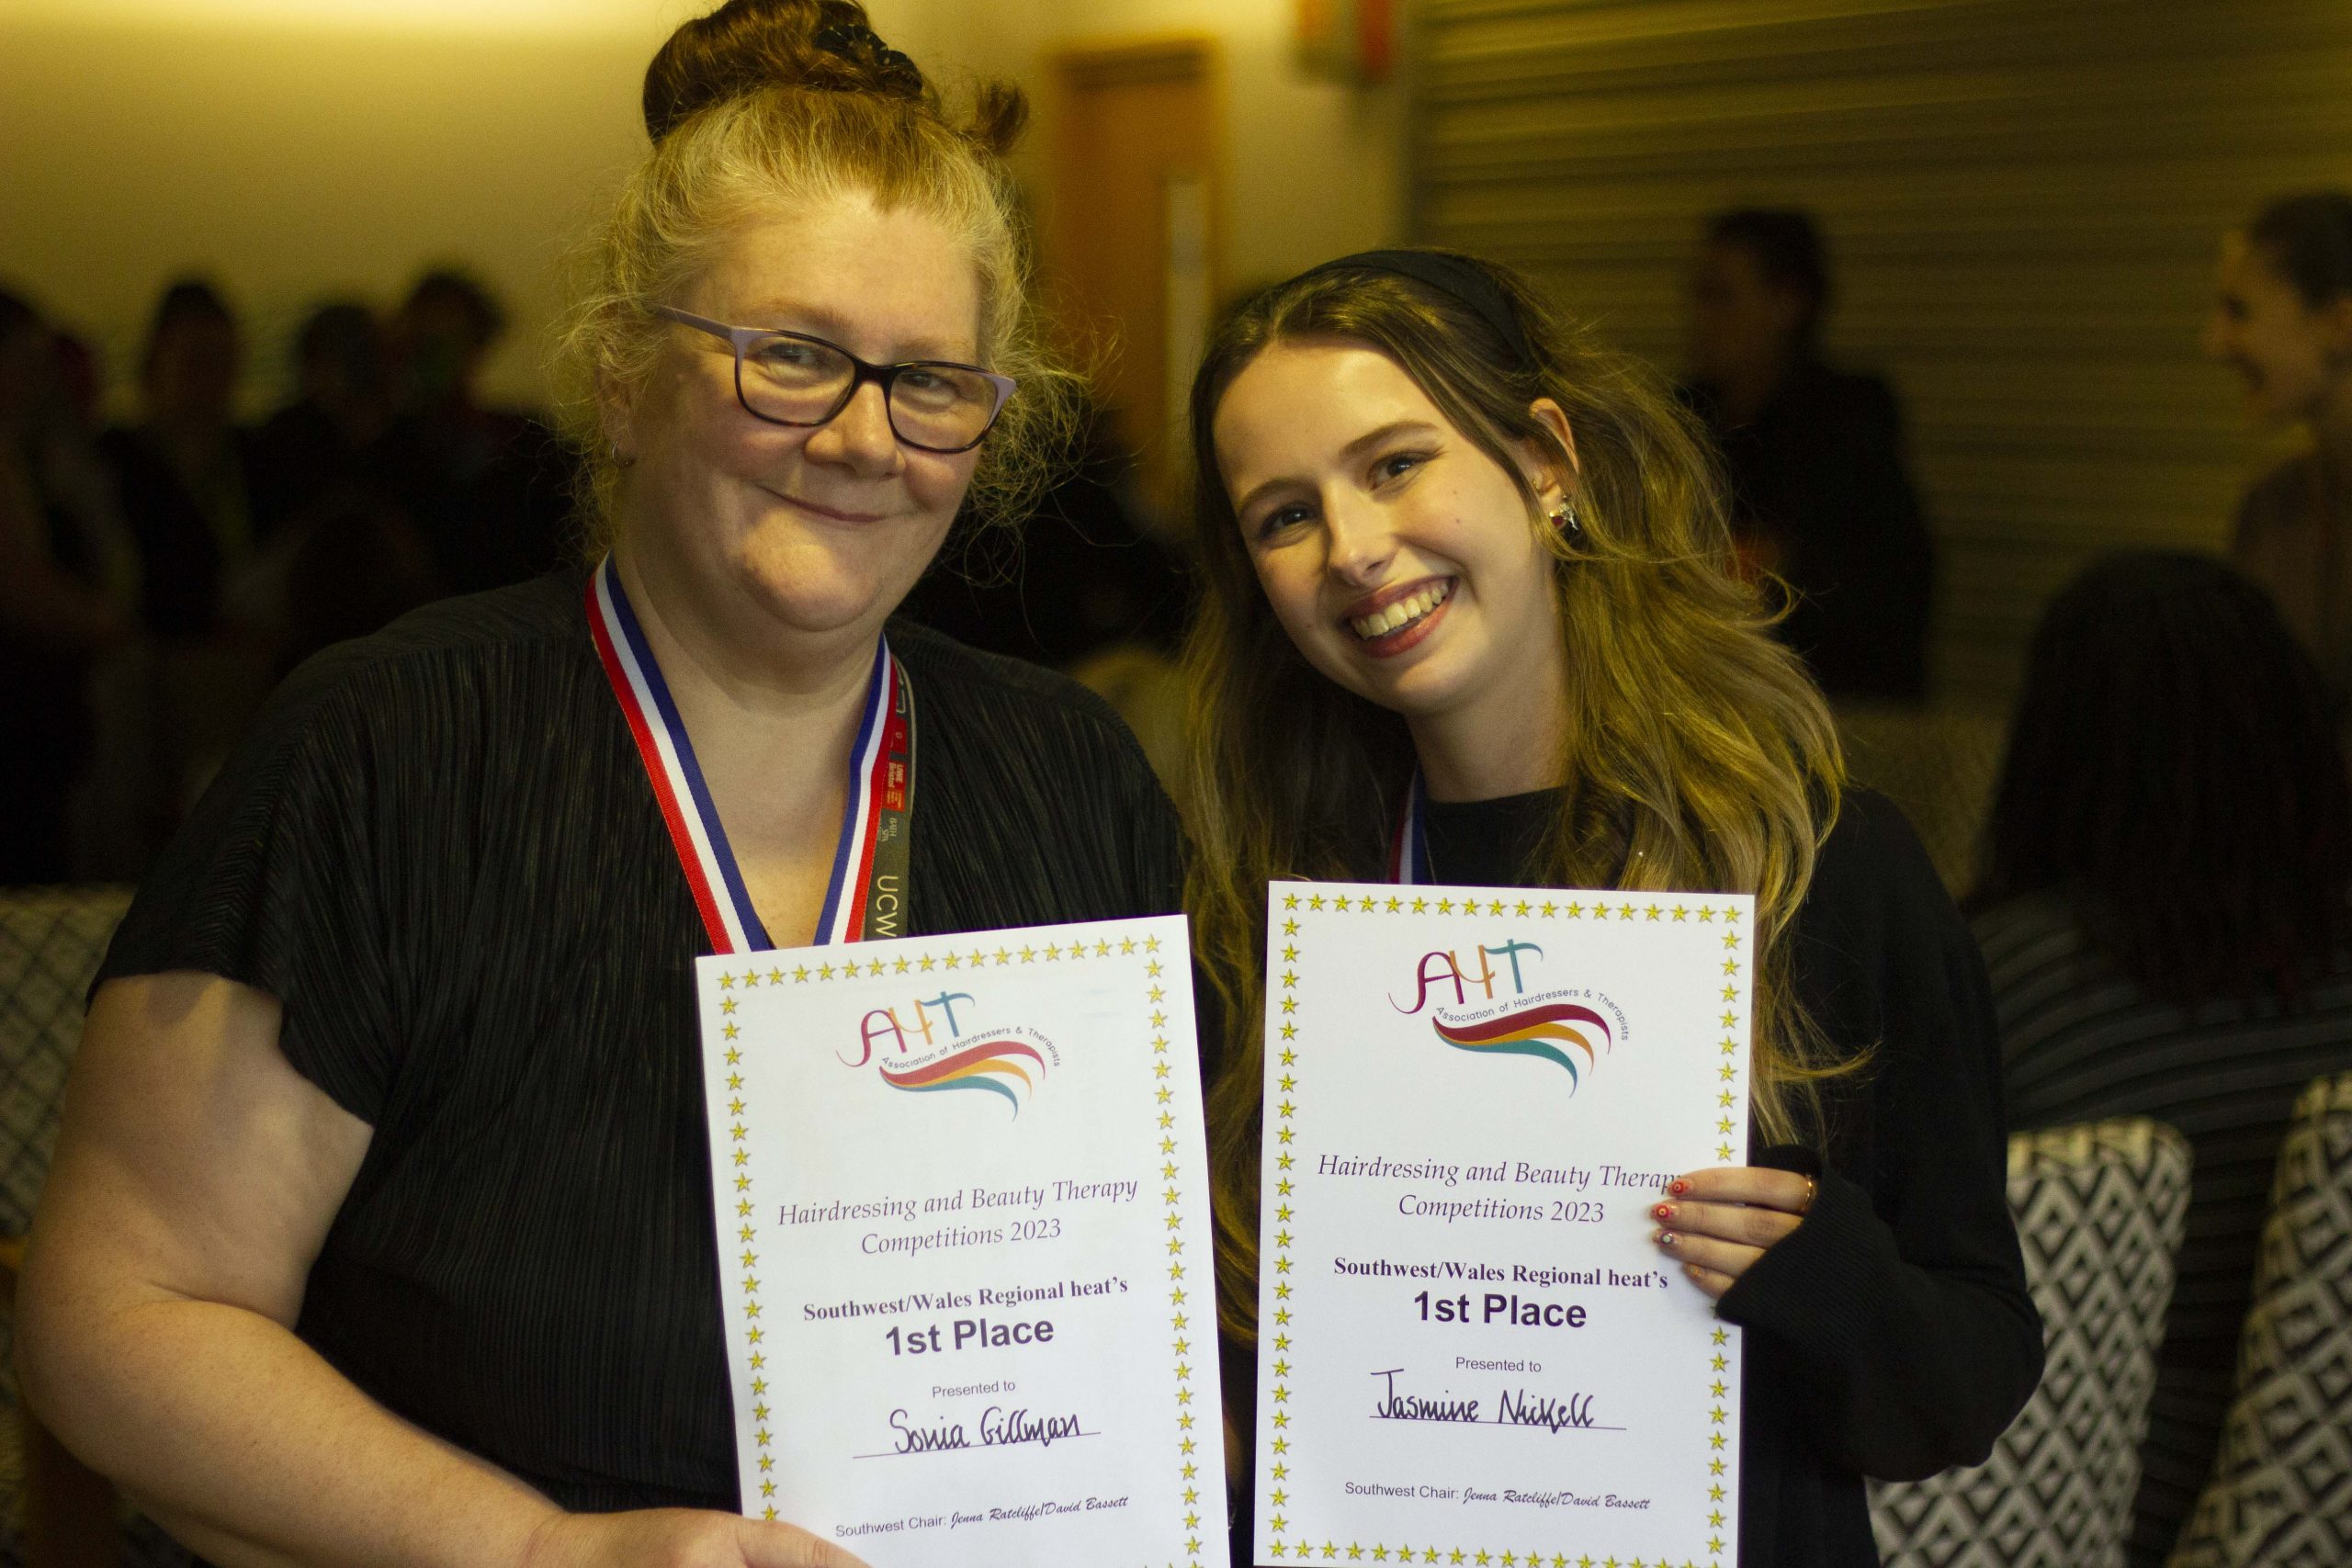 University Centre Weston Hair, Makeup and Prosthetics for Production students winning first place at the AHT regional heat competition